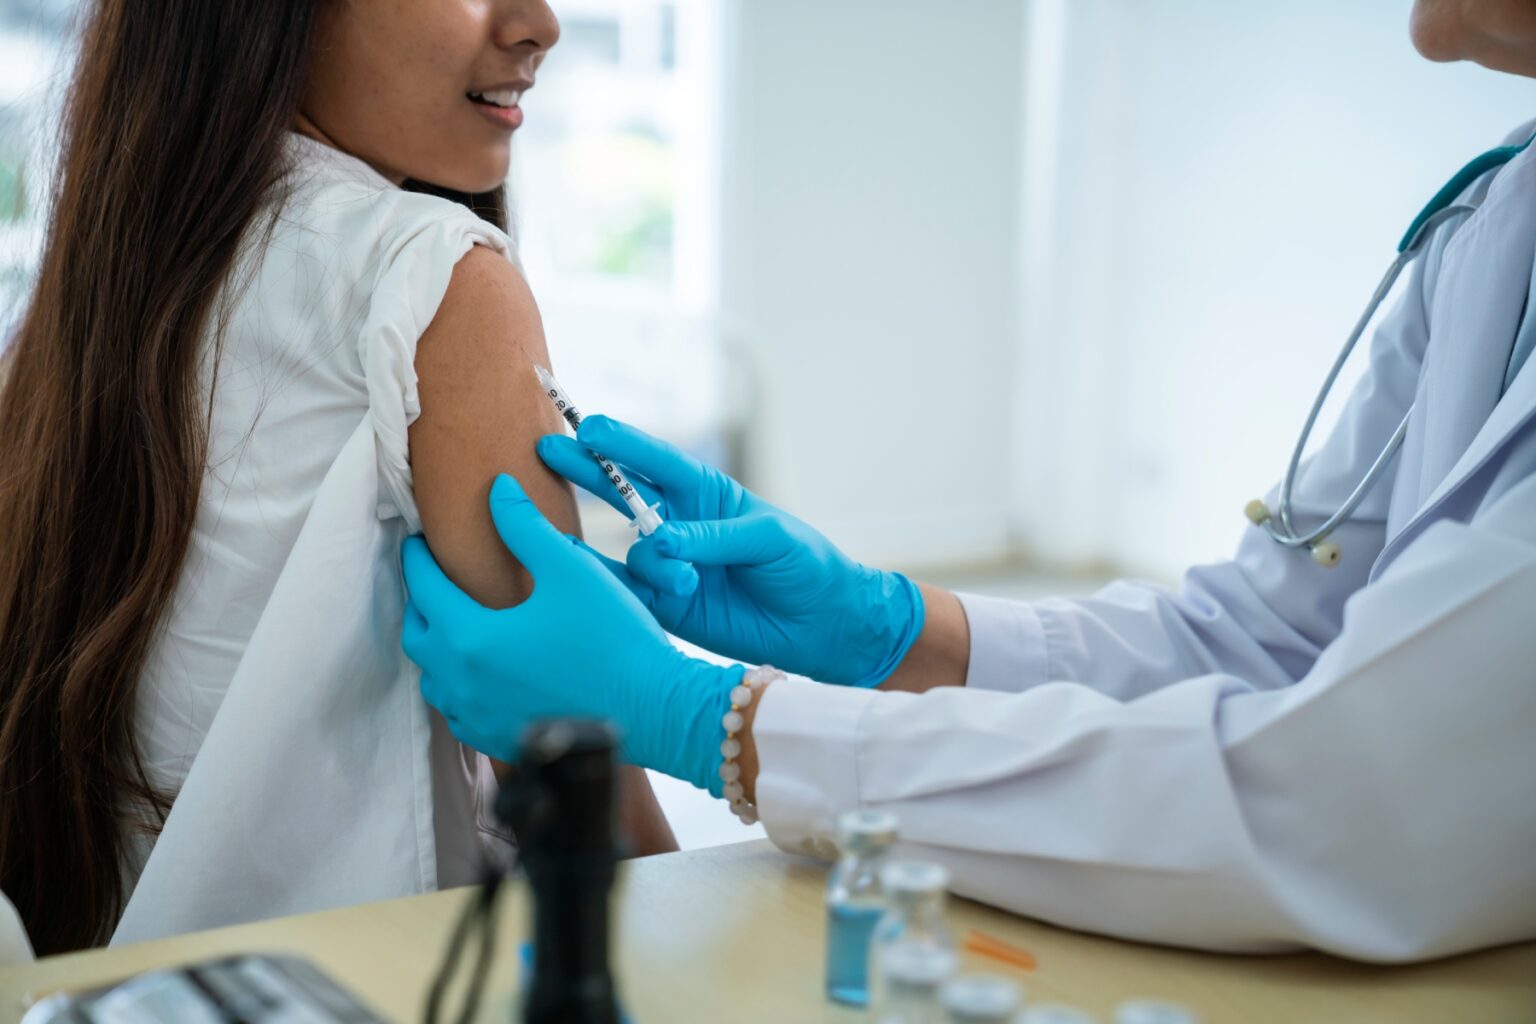 Girl gets a vaccination in her arm, nurse or doctor wears teal-colored medical gloves